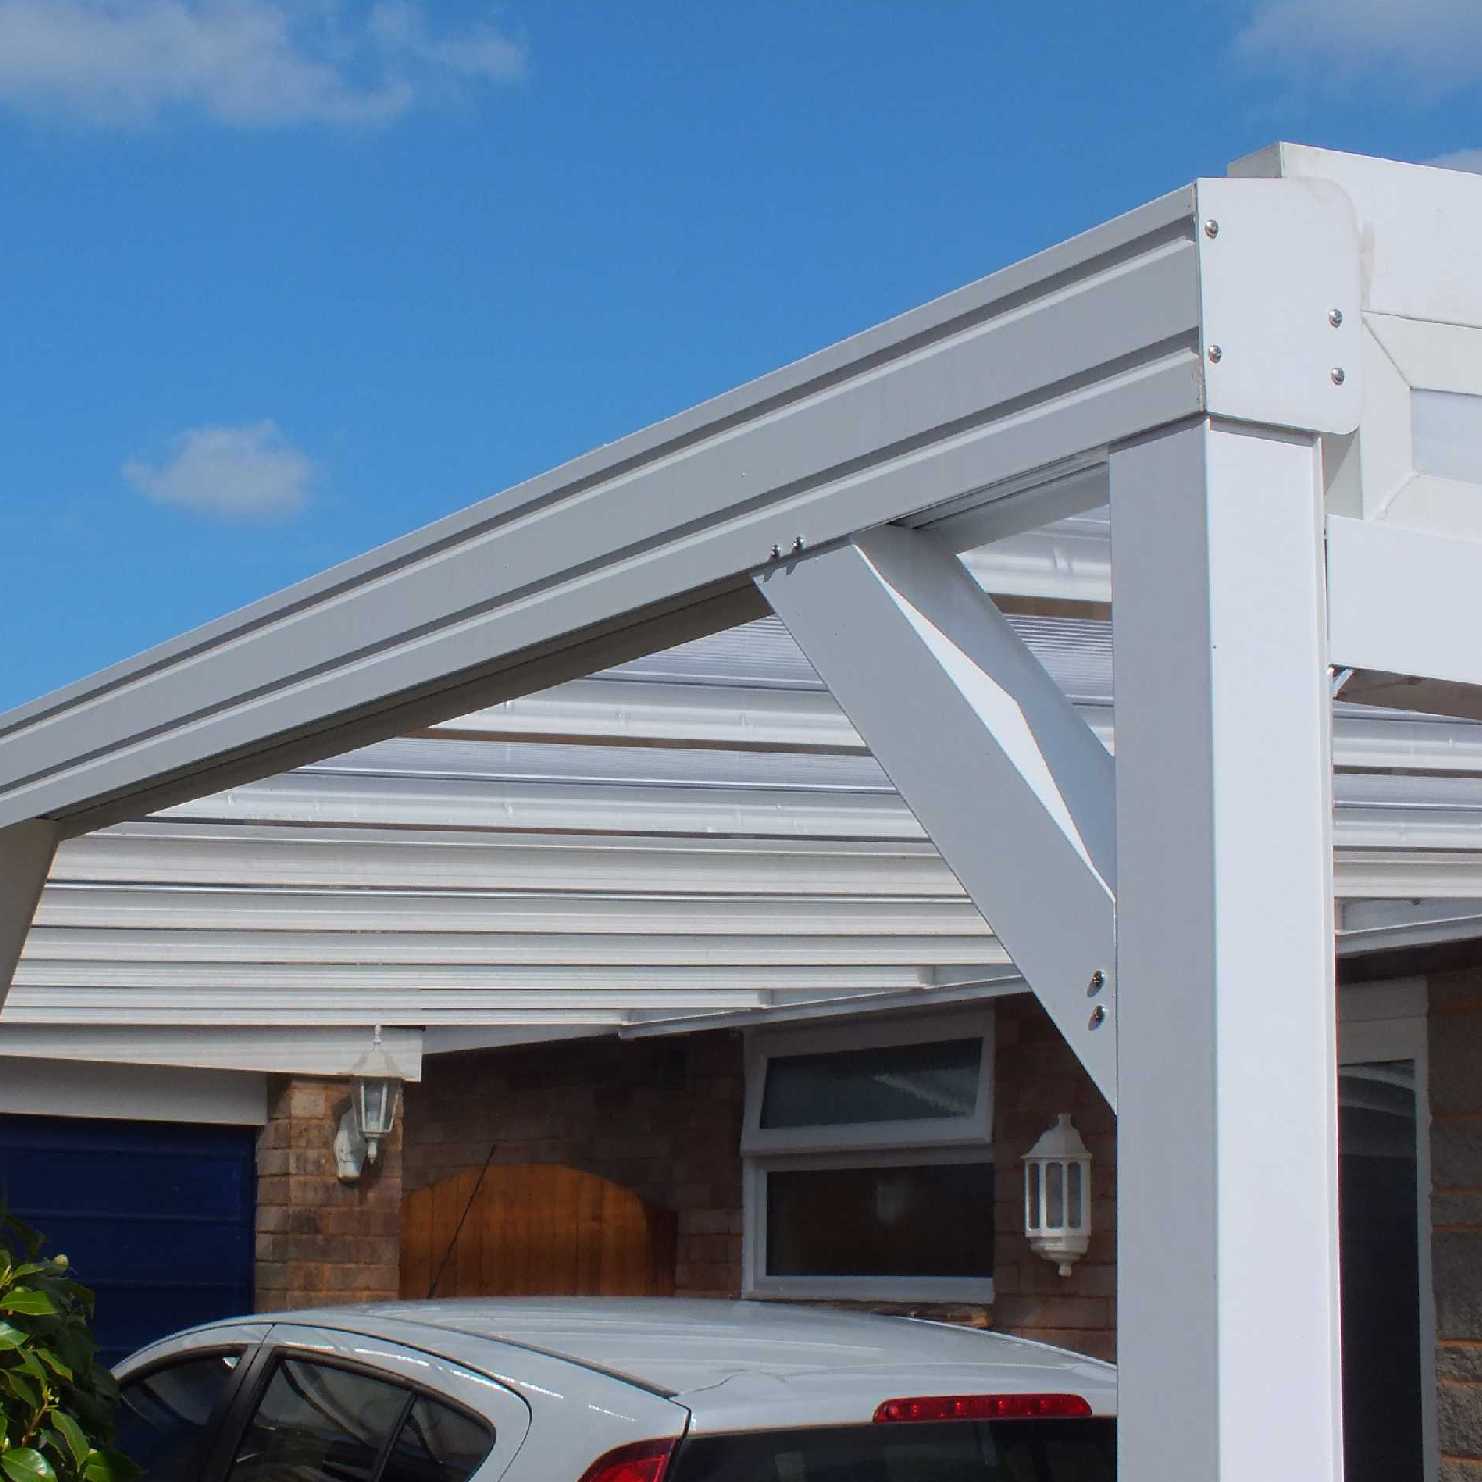 Great deals on Omega Smart Lean-To Canopy, White with 16mm Polycarbonate Glazing - 6.3m (W) x 3.0m (P), (4) Supporting Posts